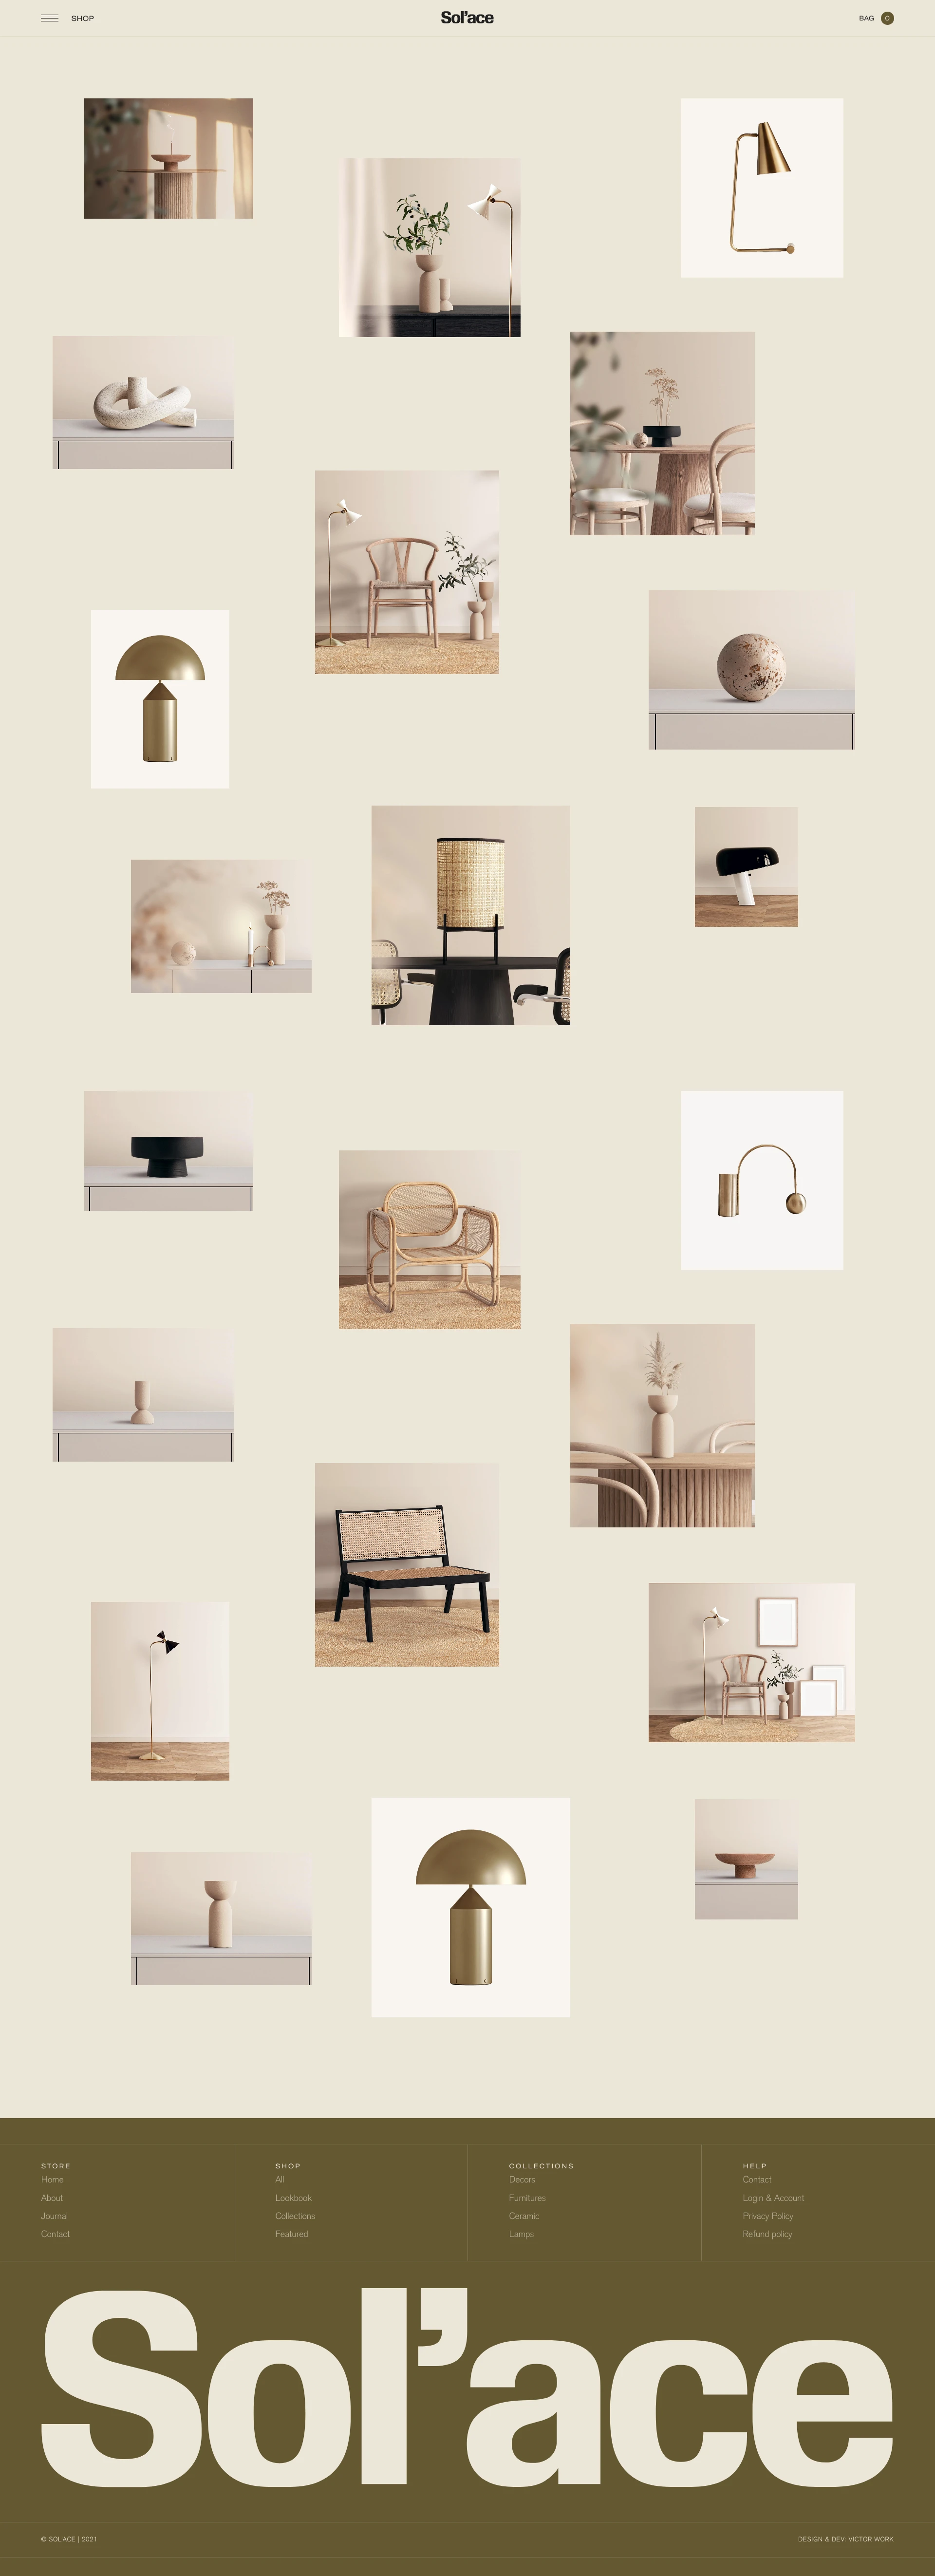 Sol’ace Landing Page Example: Developed the concept of exclusivity, a Sol’ace features timeless furniture, with natural fabrics, curved lines, plenty of mirrors and classic design, which can be incorporated into any decor project.